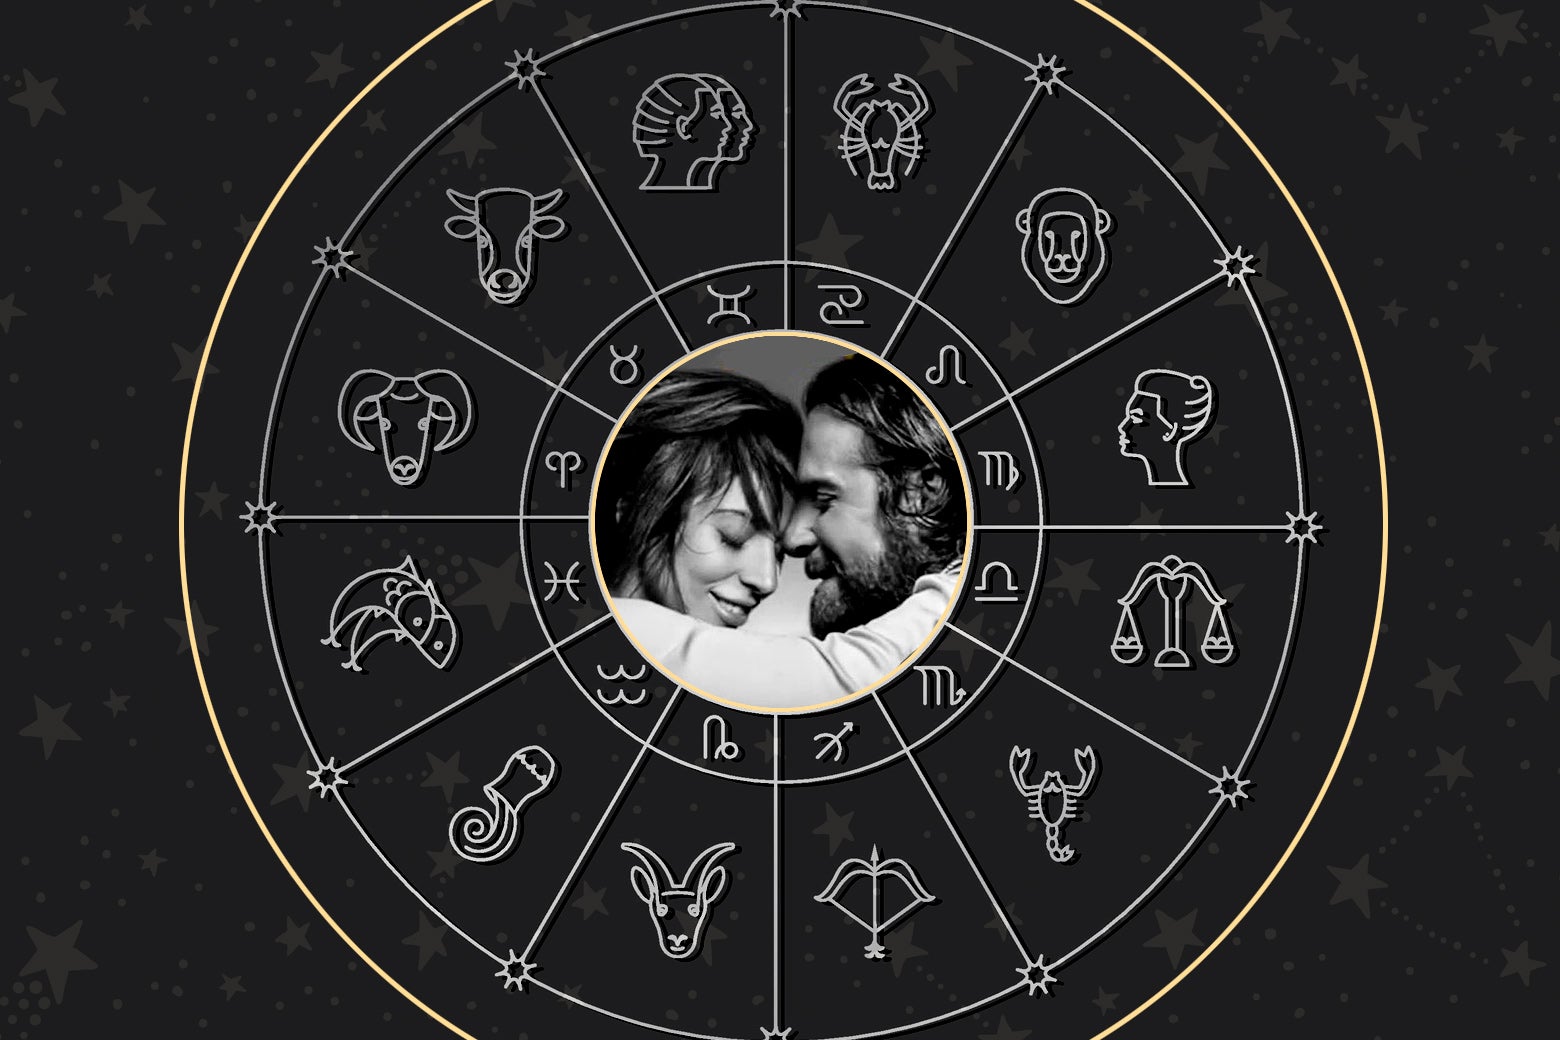 Lady Gaga and Bradley Cooper within an astrological chart